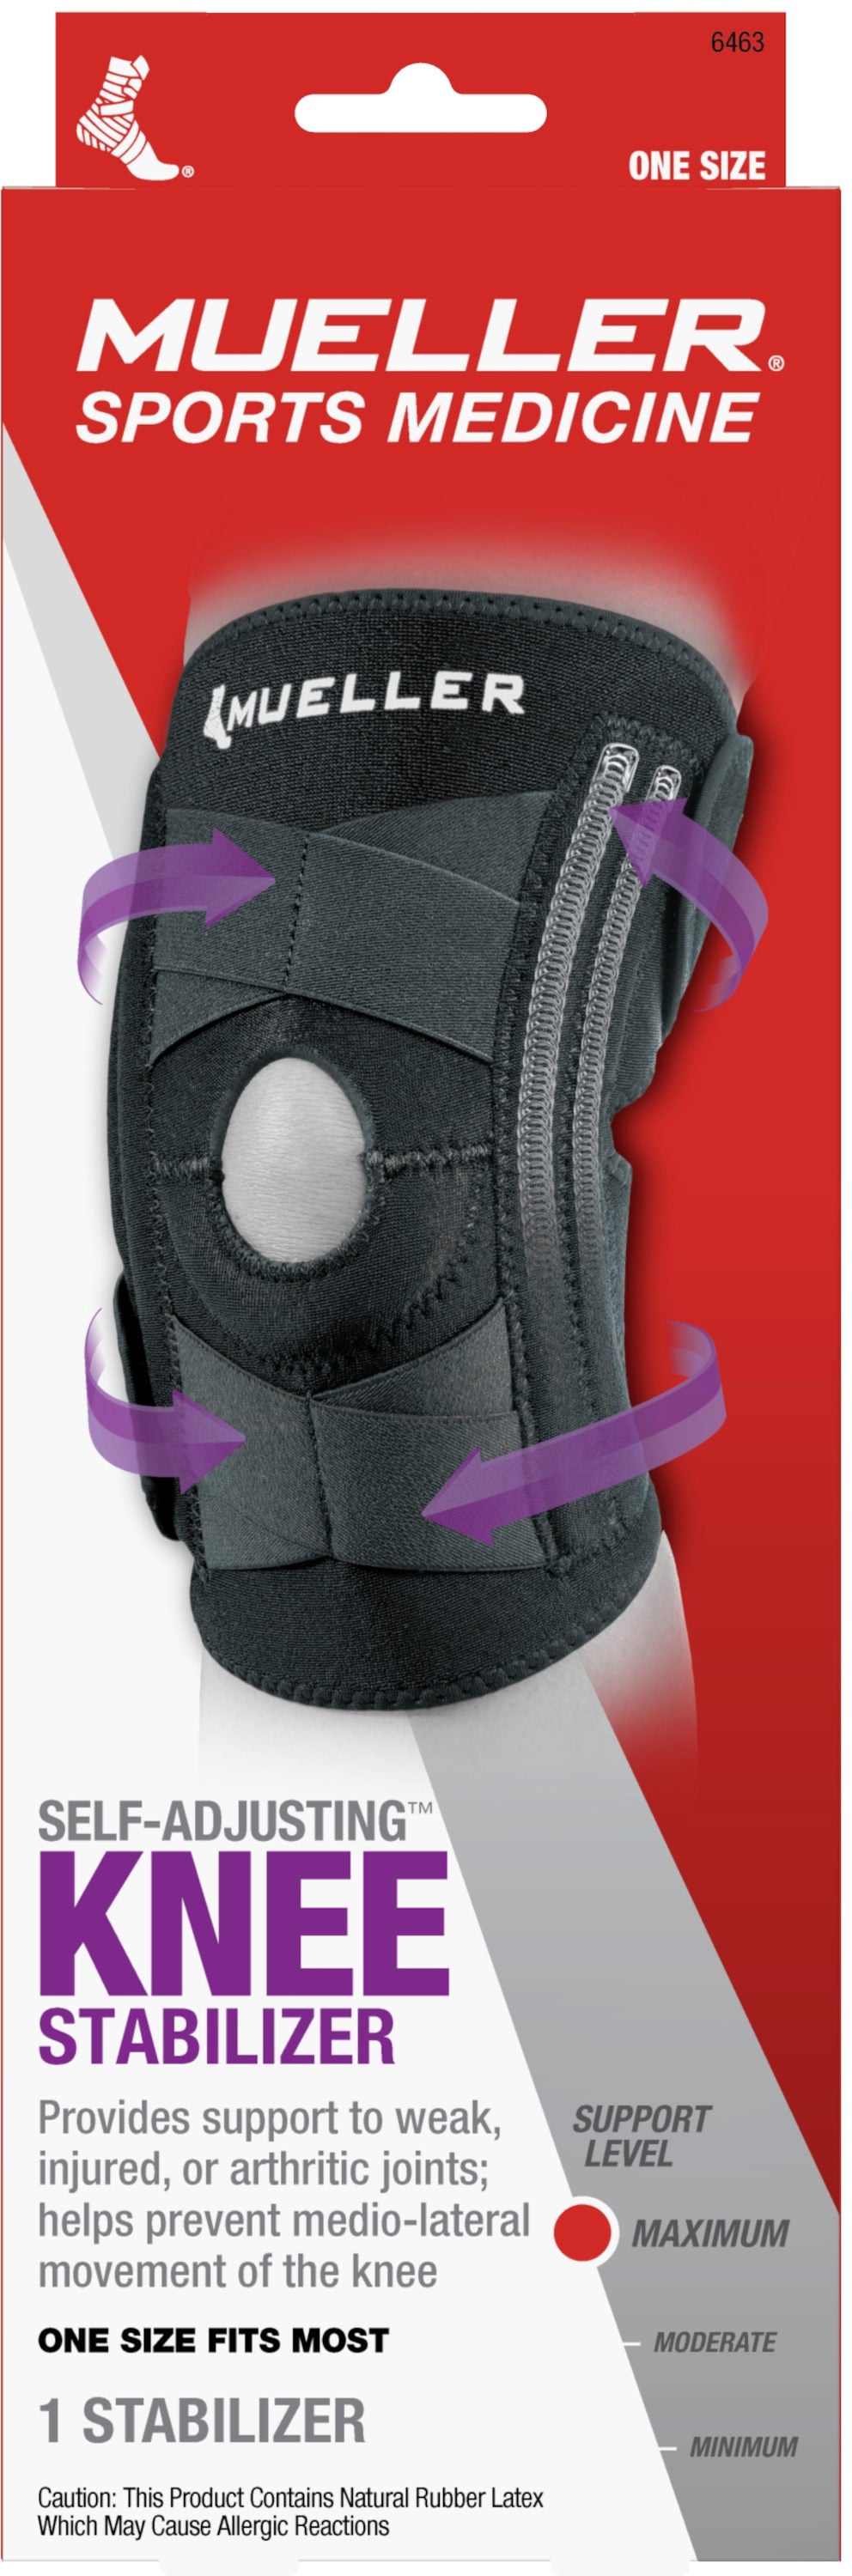 Copper Fit Black Knee Brace with Moderate Compression, Contoured Design,  Ultra-Soft Material, Stay-in-Place Band